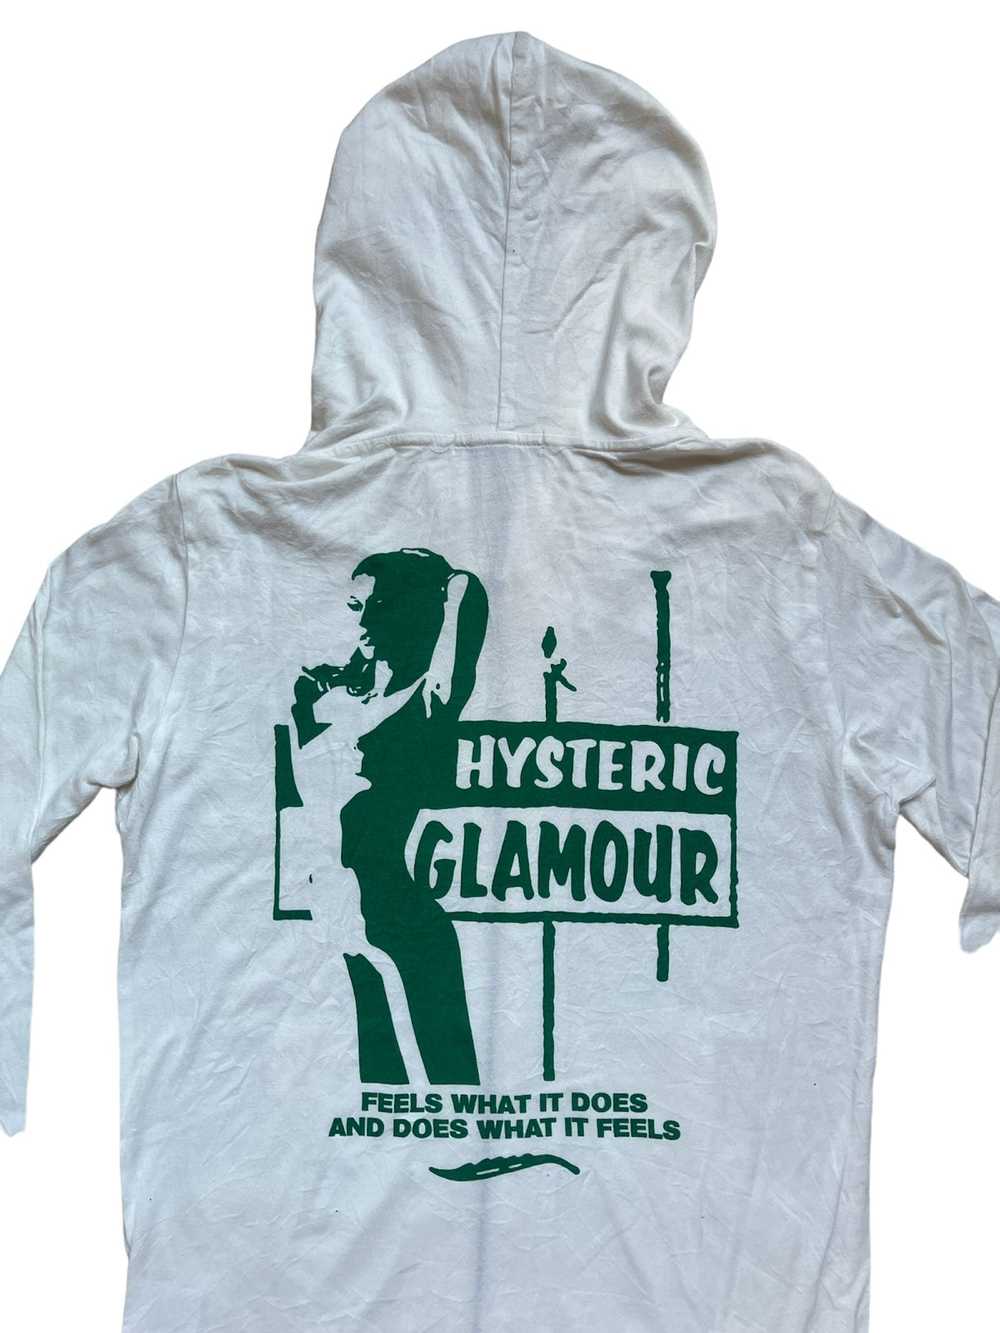 Hysteric Glamour Hysteric Glamour Hoodie - image 3